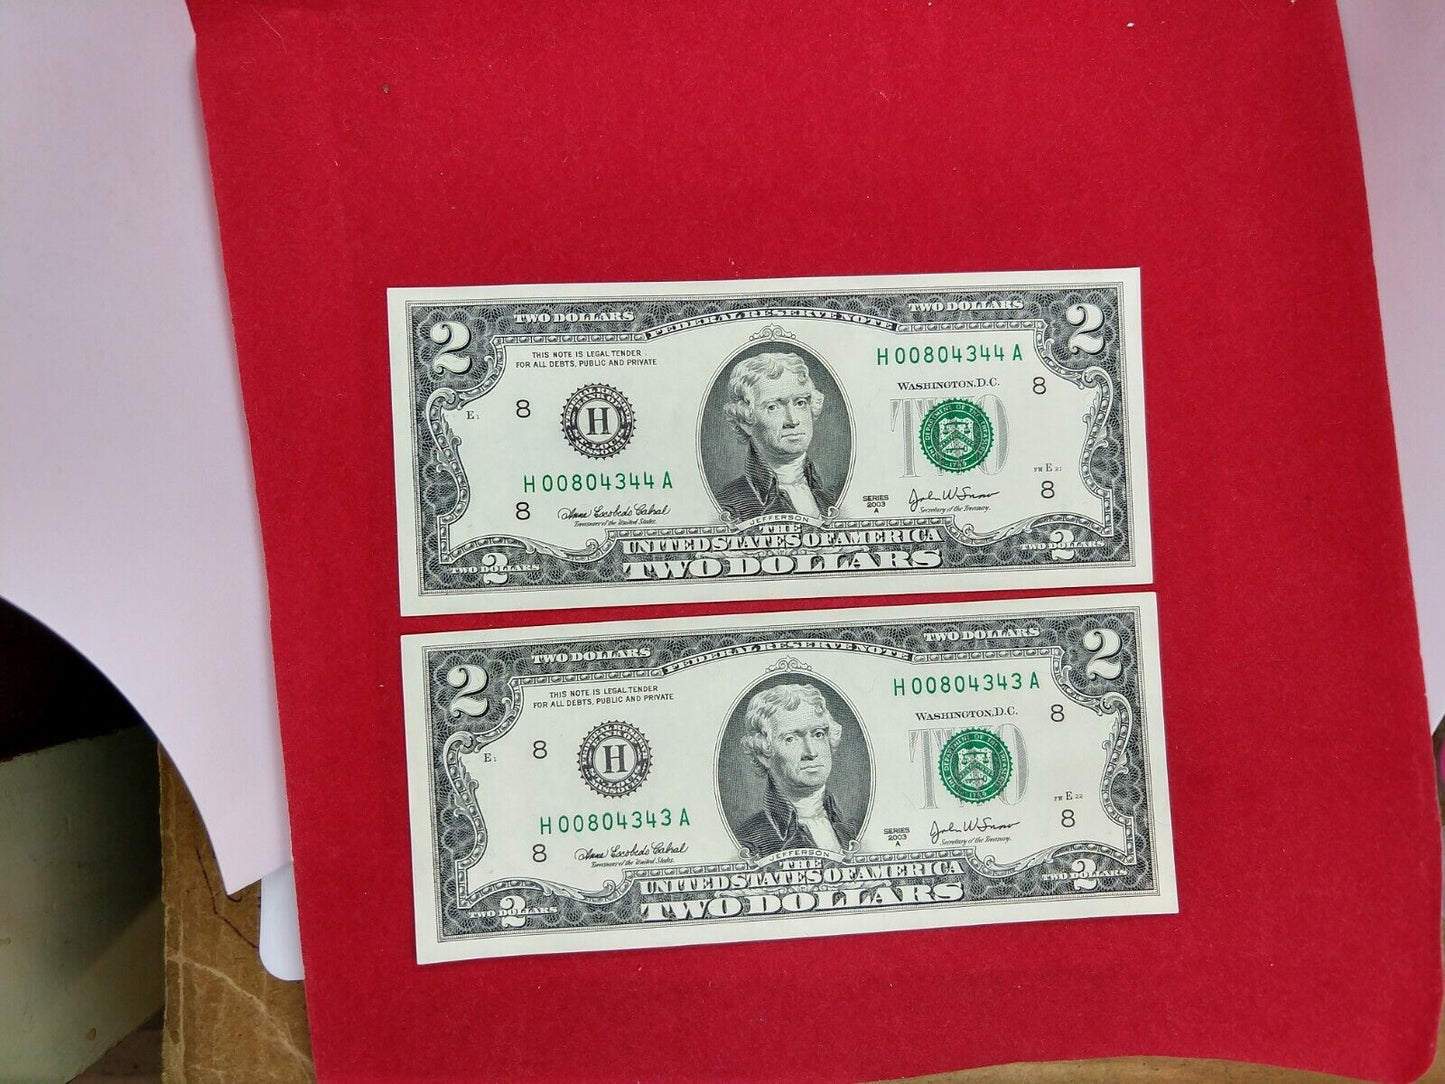 2 CONSECUTIVE 2003 $2 FRN FEDERAL RESERVE NOTE CH UNC REPEAT SERIAL NUMBERS